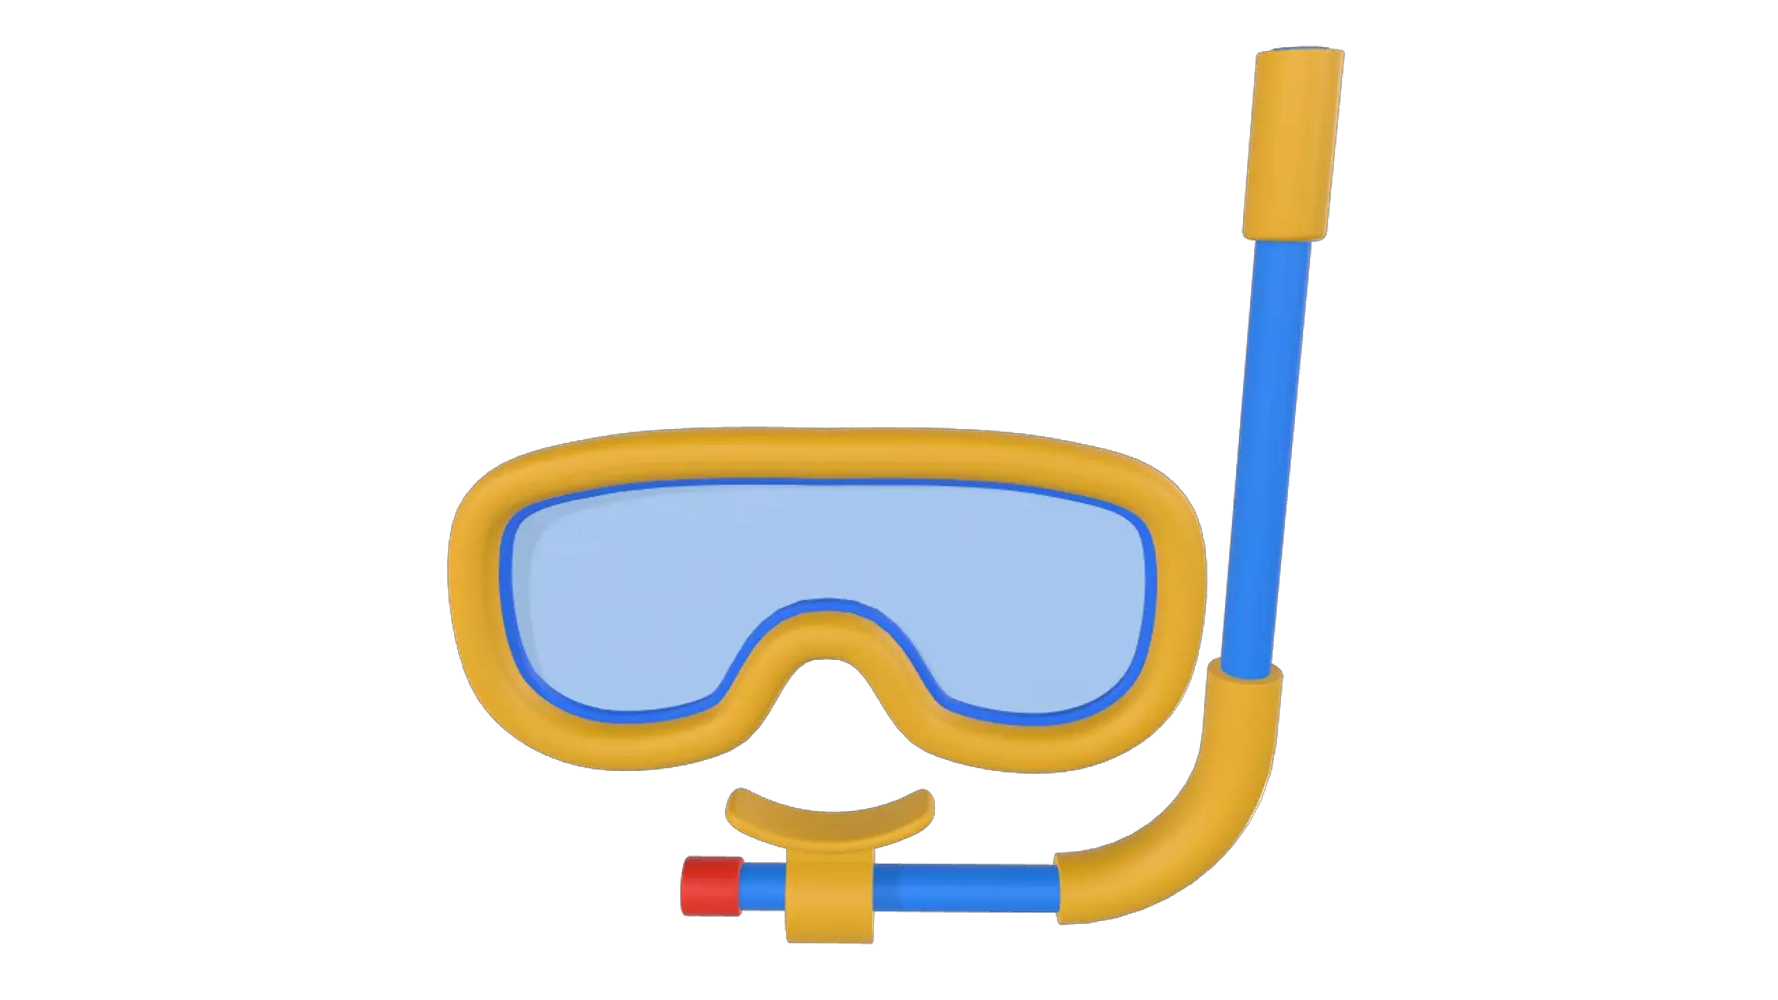 Diving Glasses 3D Graphic